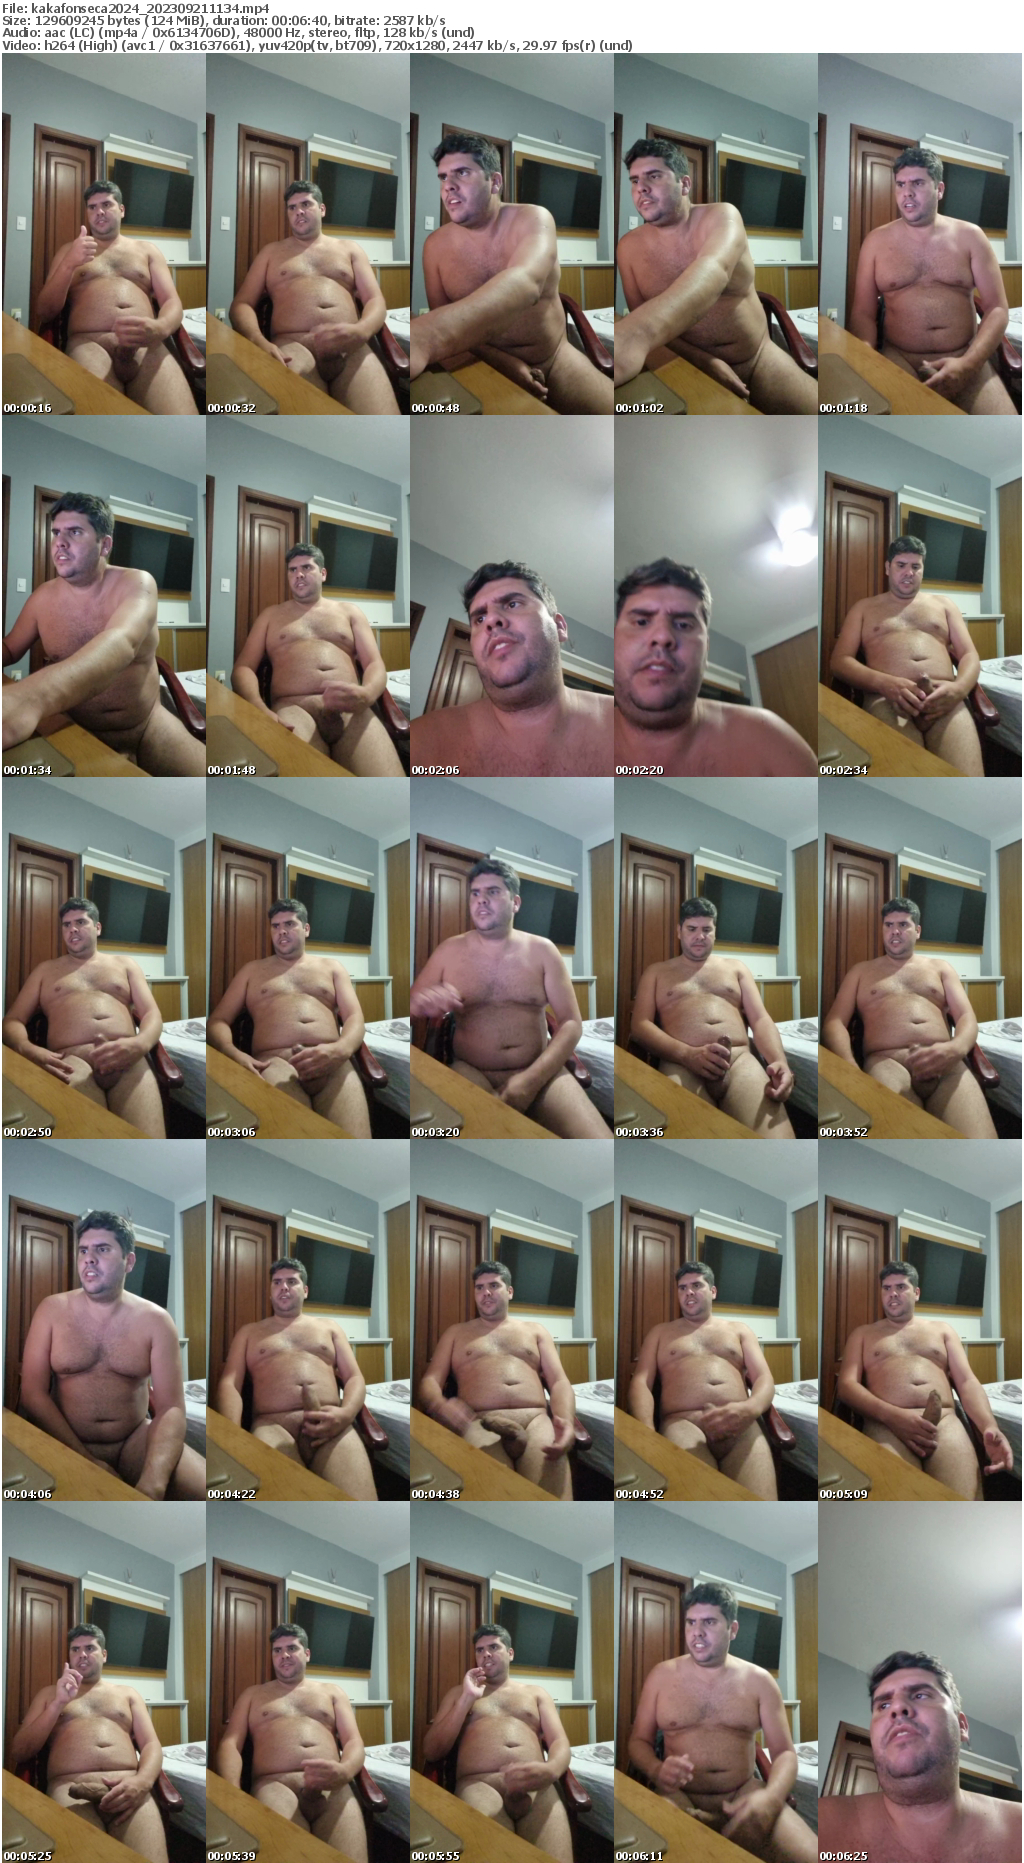 Preview thumb from kakafonseca2024 on 2023-09-21 @ cam4